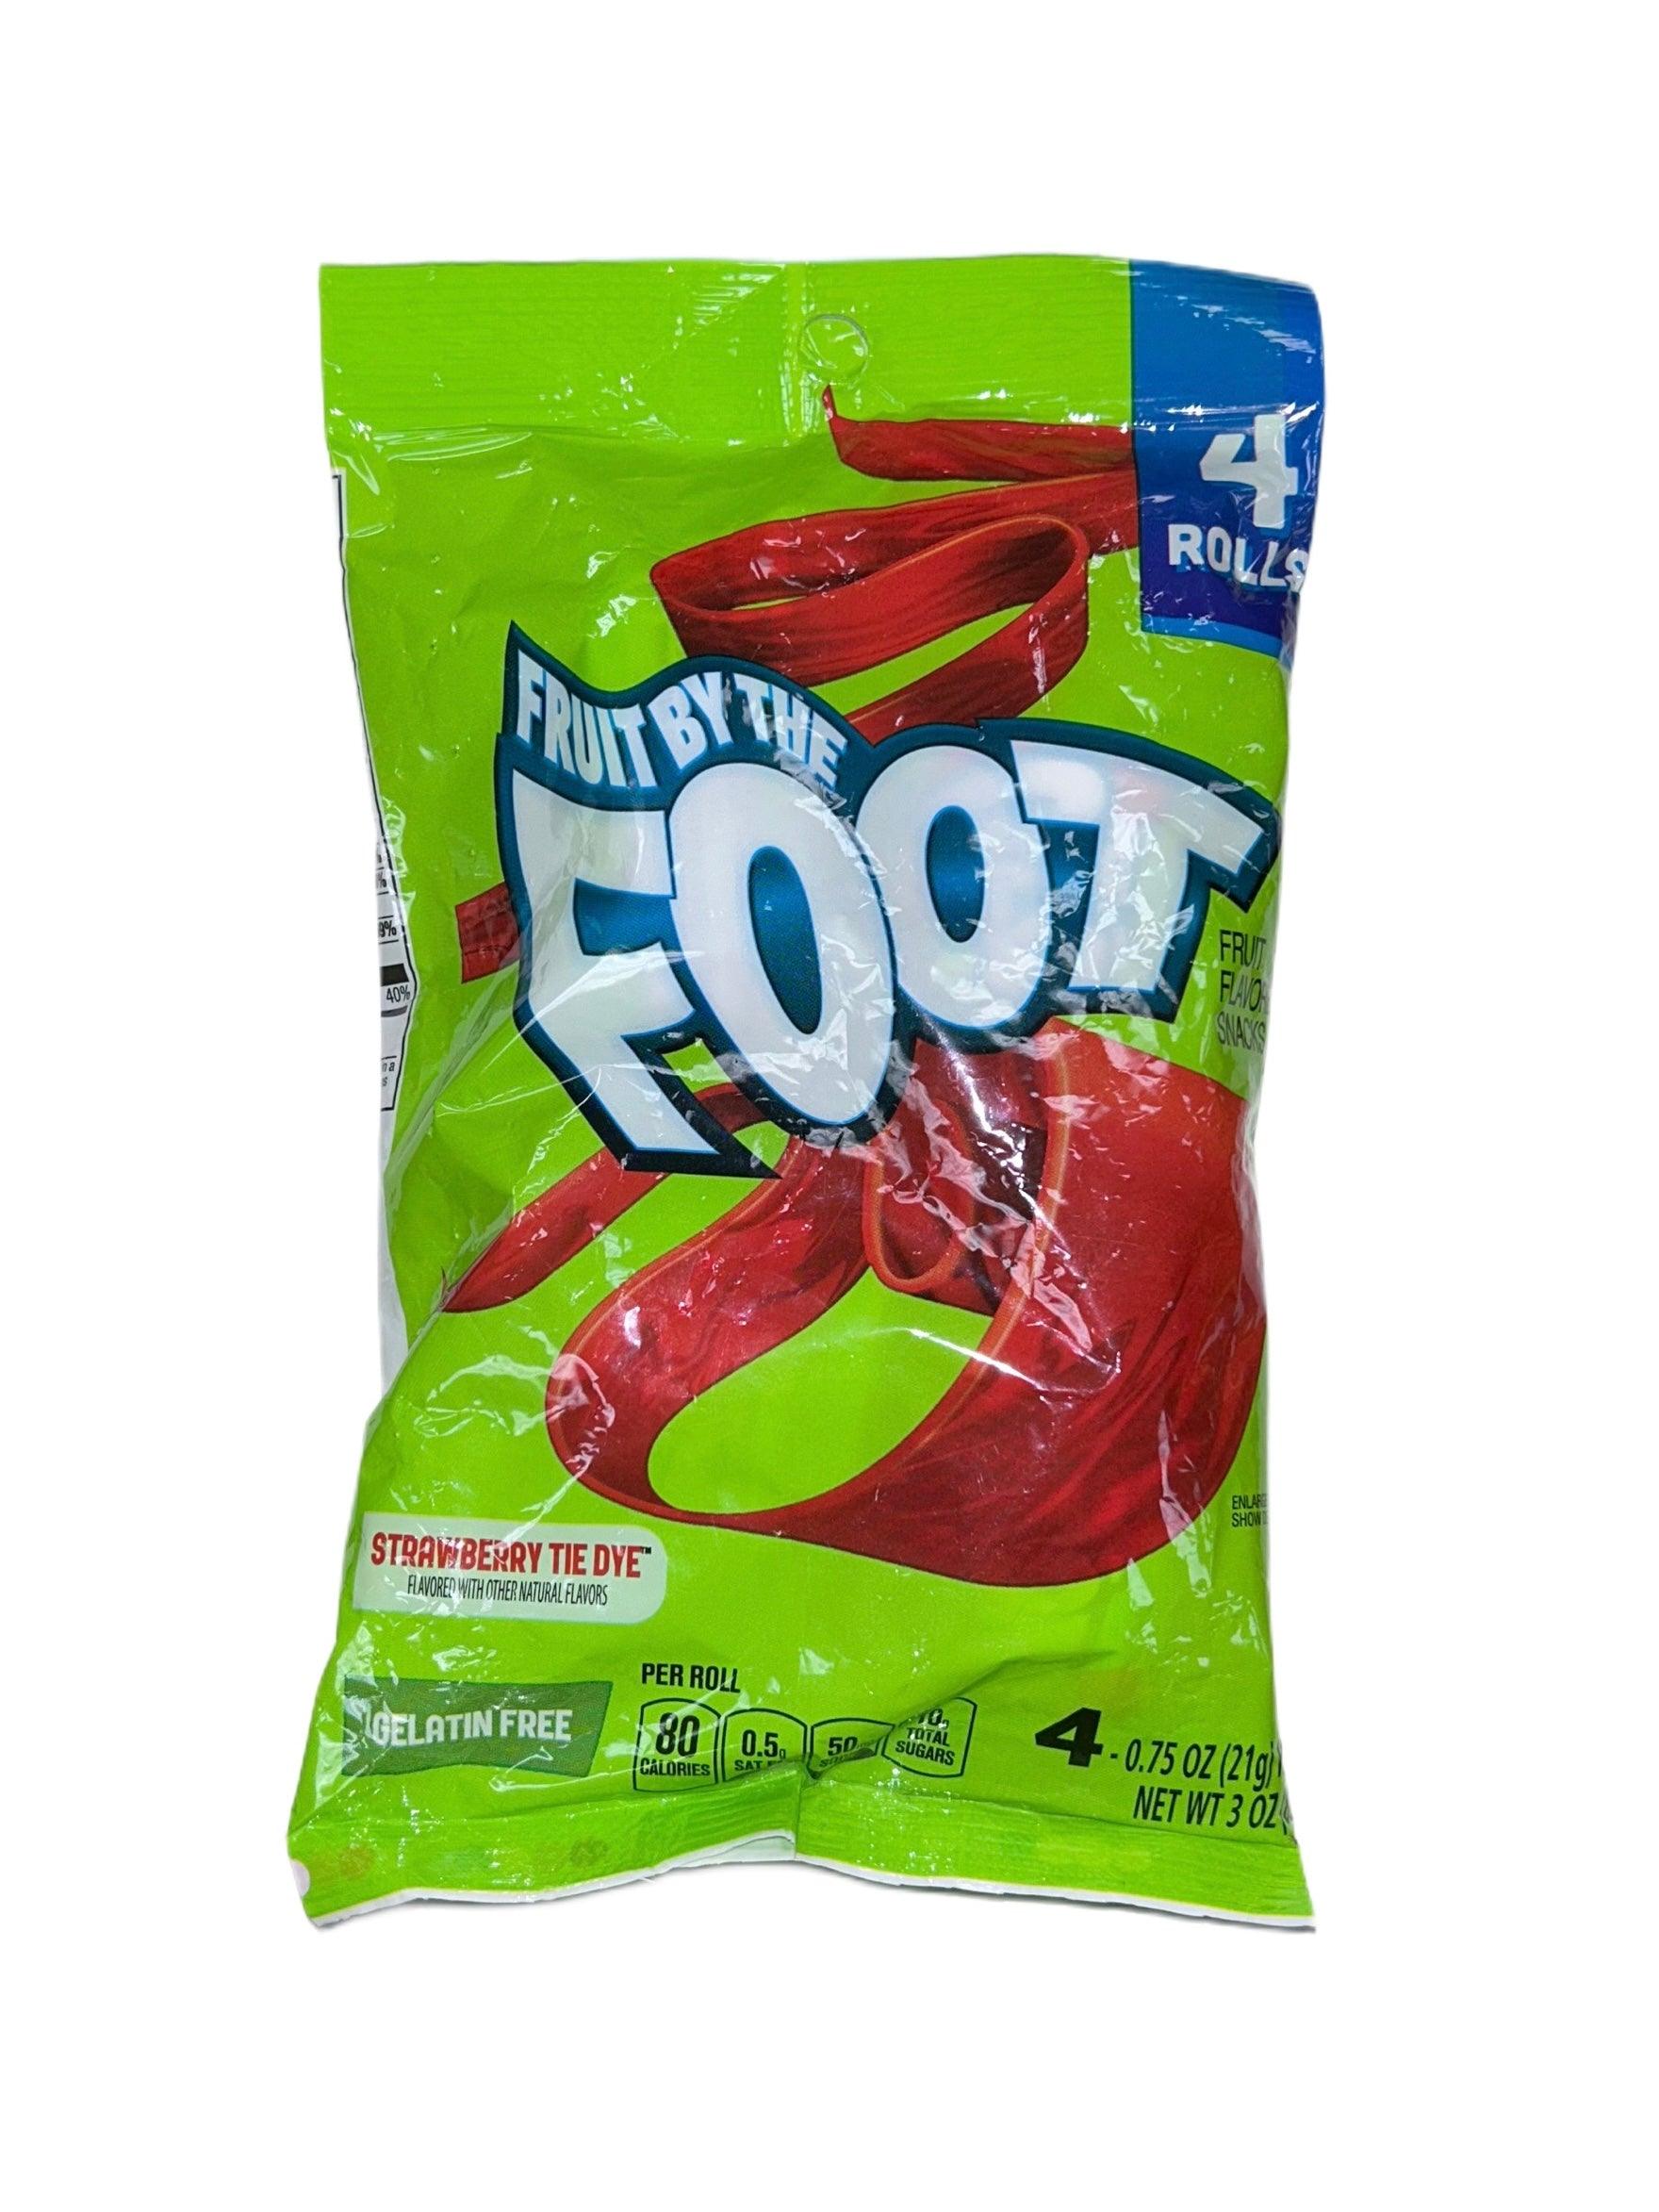 Fruit By the Foot Strawberry Tie Die Bag 85G - Extreme Snacks